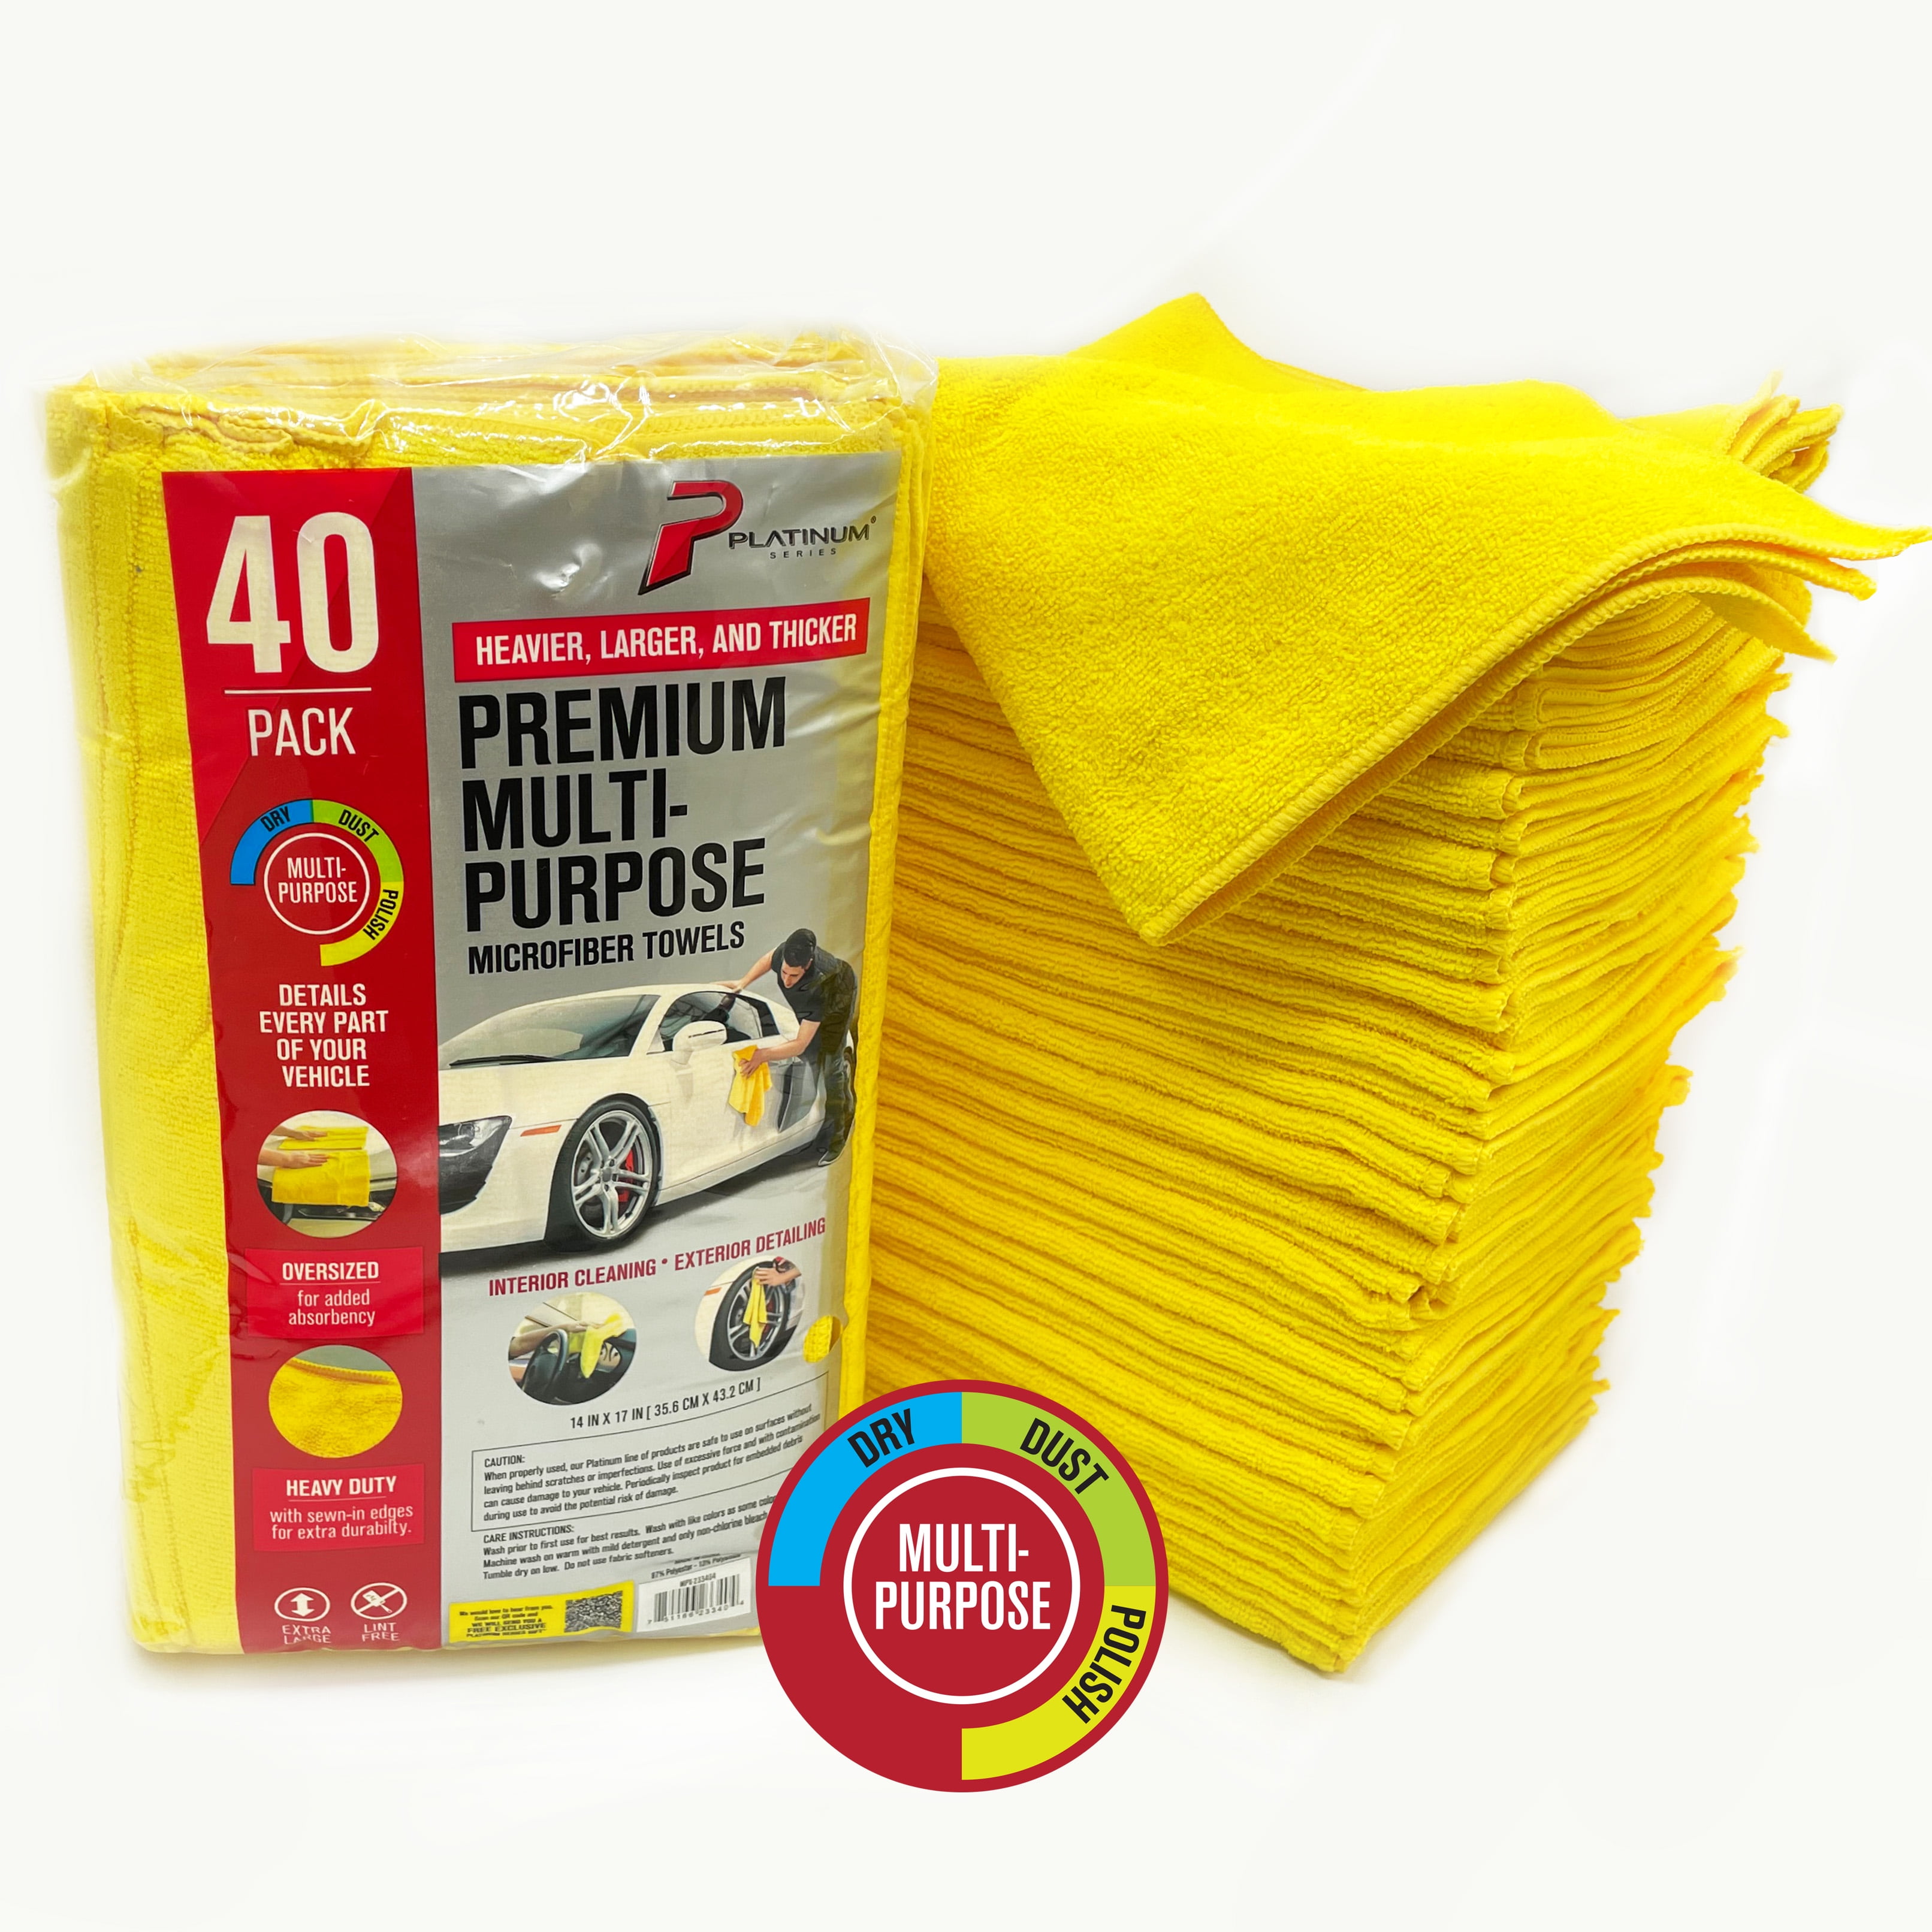 Ultra-Thick Microfiber Cleaning Cloths Lint Free Streak Free for Tackling Any Cleaning Job with Ease Super Absorbent Dust Cloths Buffing Cloths with Two Color on Two Side by House Again 6-Pack 